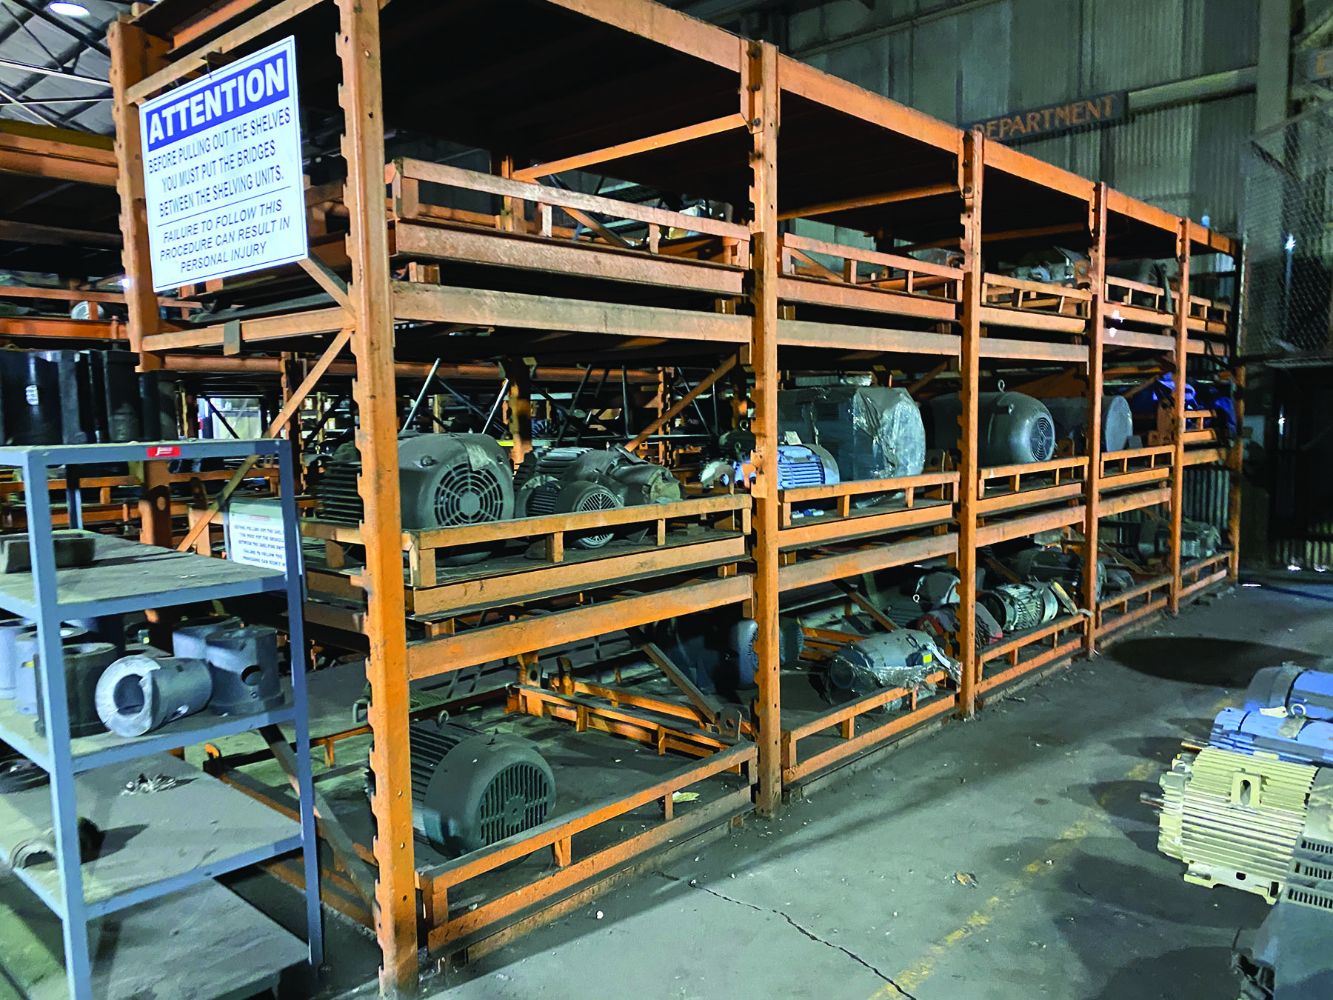 Mountain State Carbon, LLC - MROs, Store Room Items, and Spare Parts from a Steel Mill Coke Facility